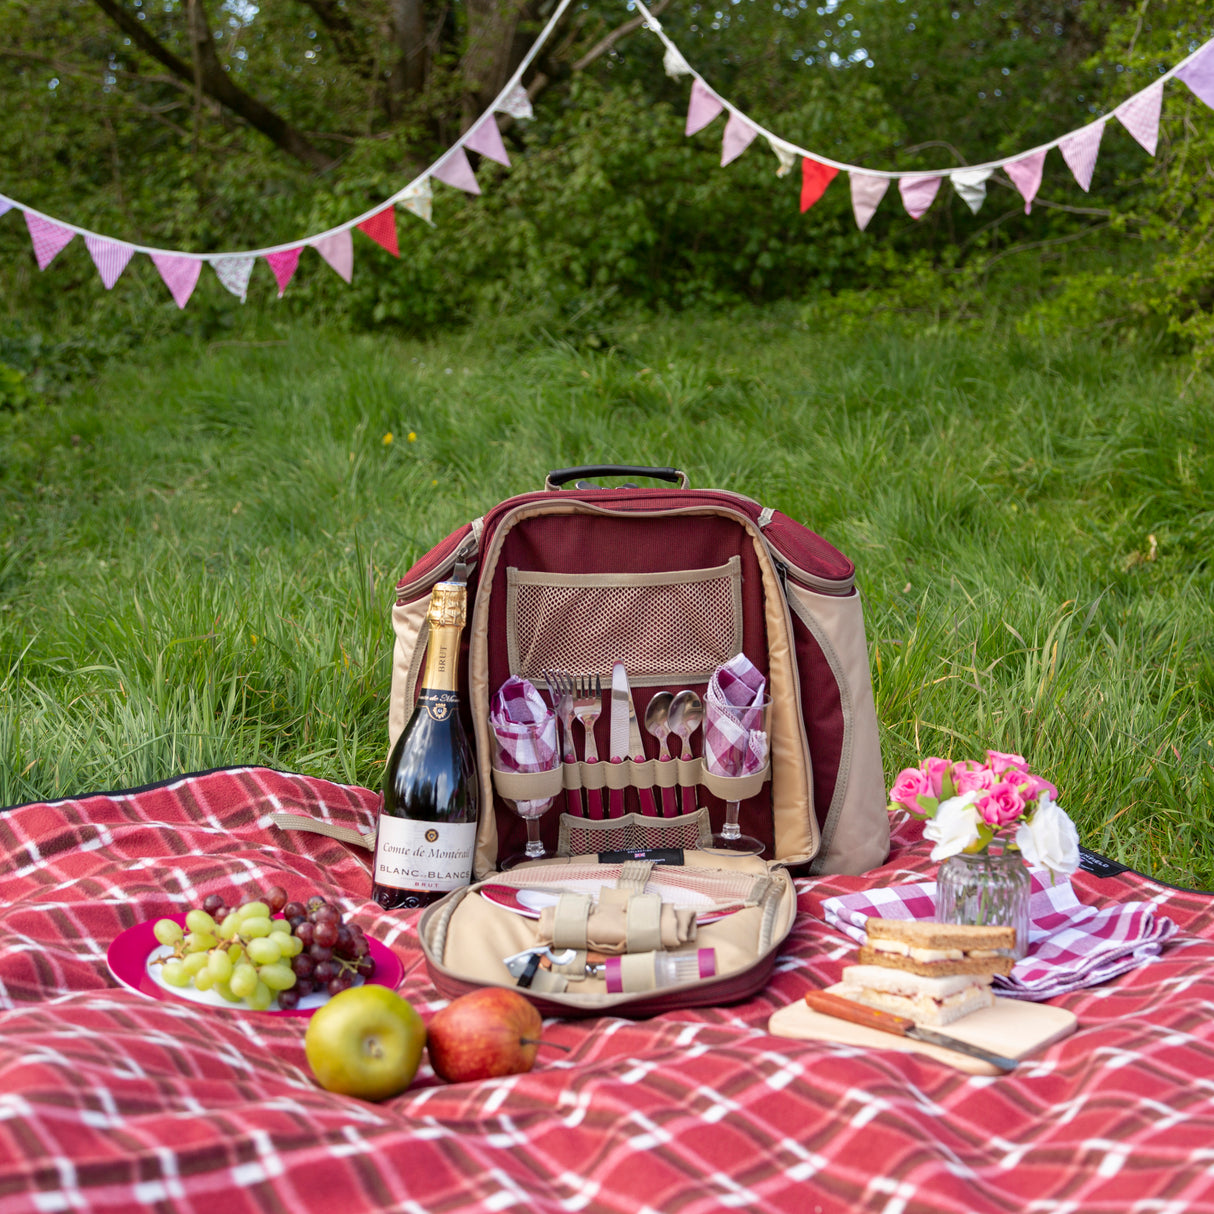 Deluxe Picnic Backpack Hamper for Two People with Matching Picnic Blanket - The Greenfield Collection